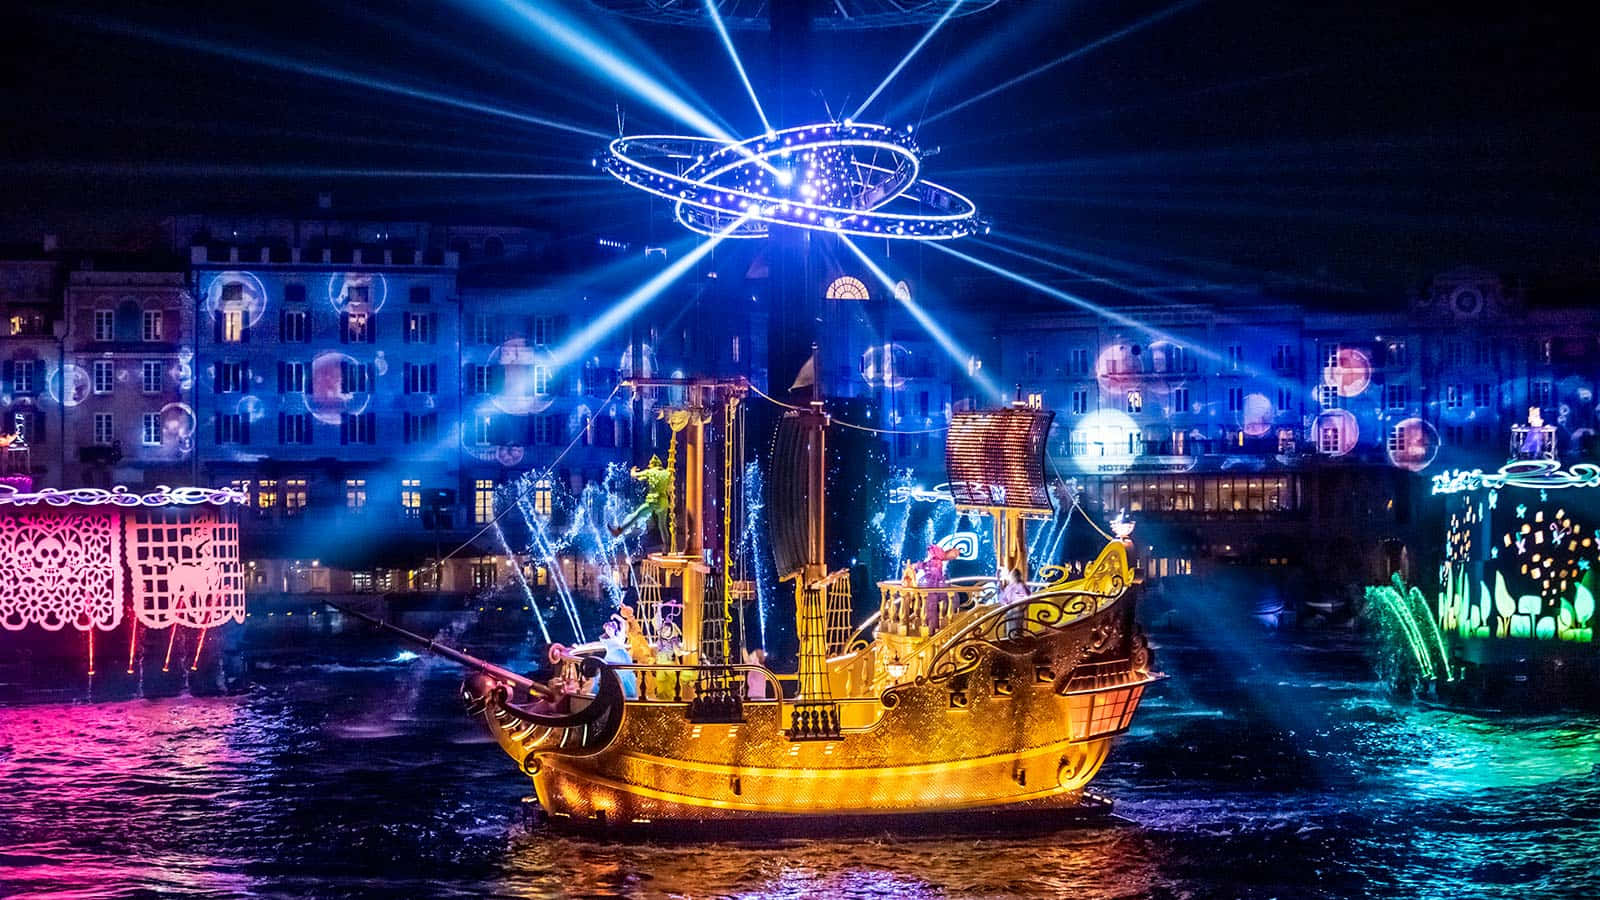 A Boat With Lights On It In A Waterway